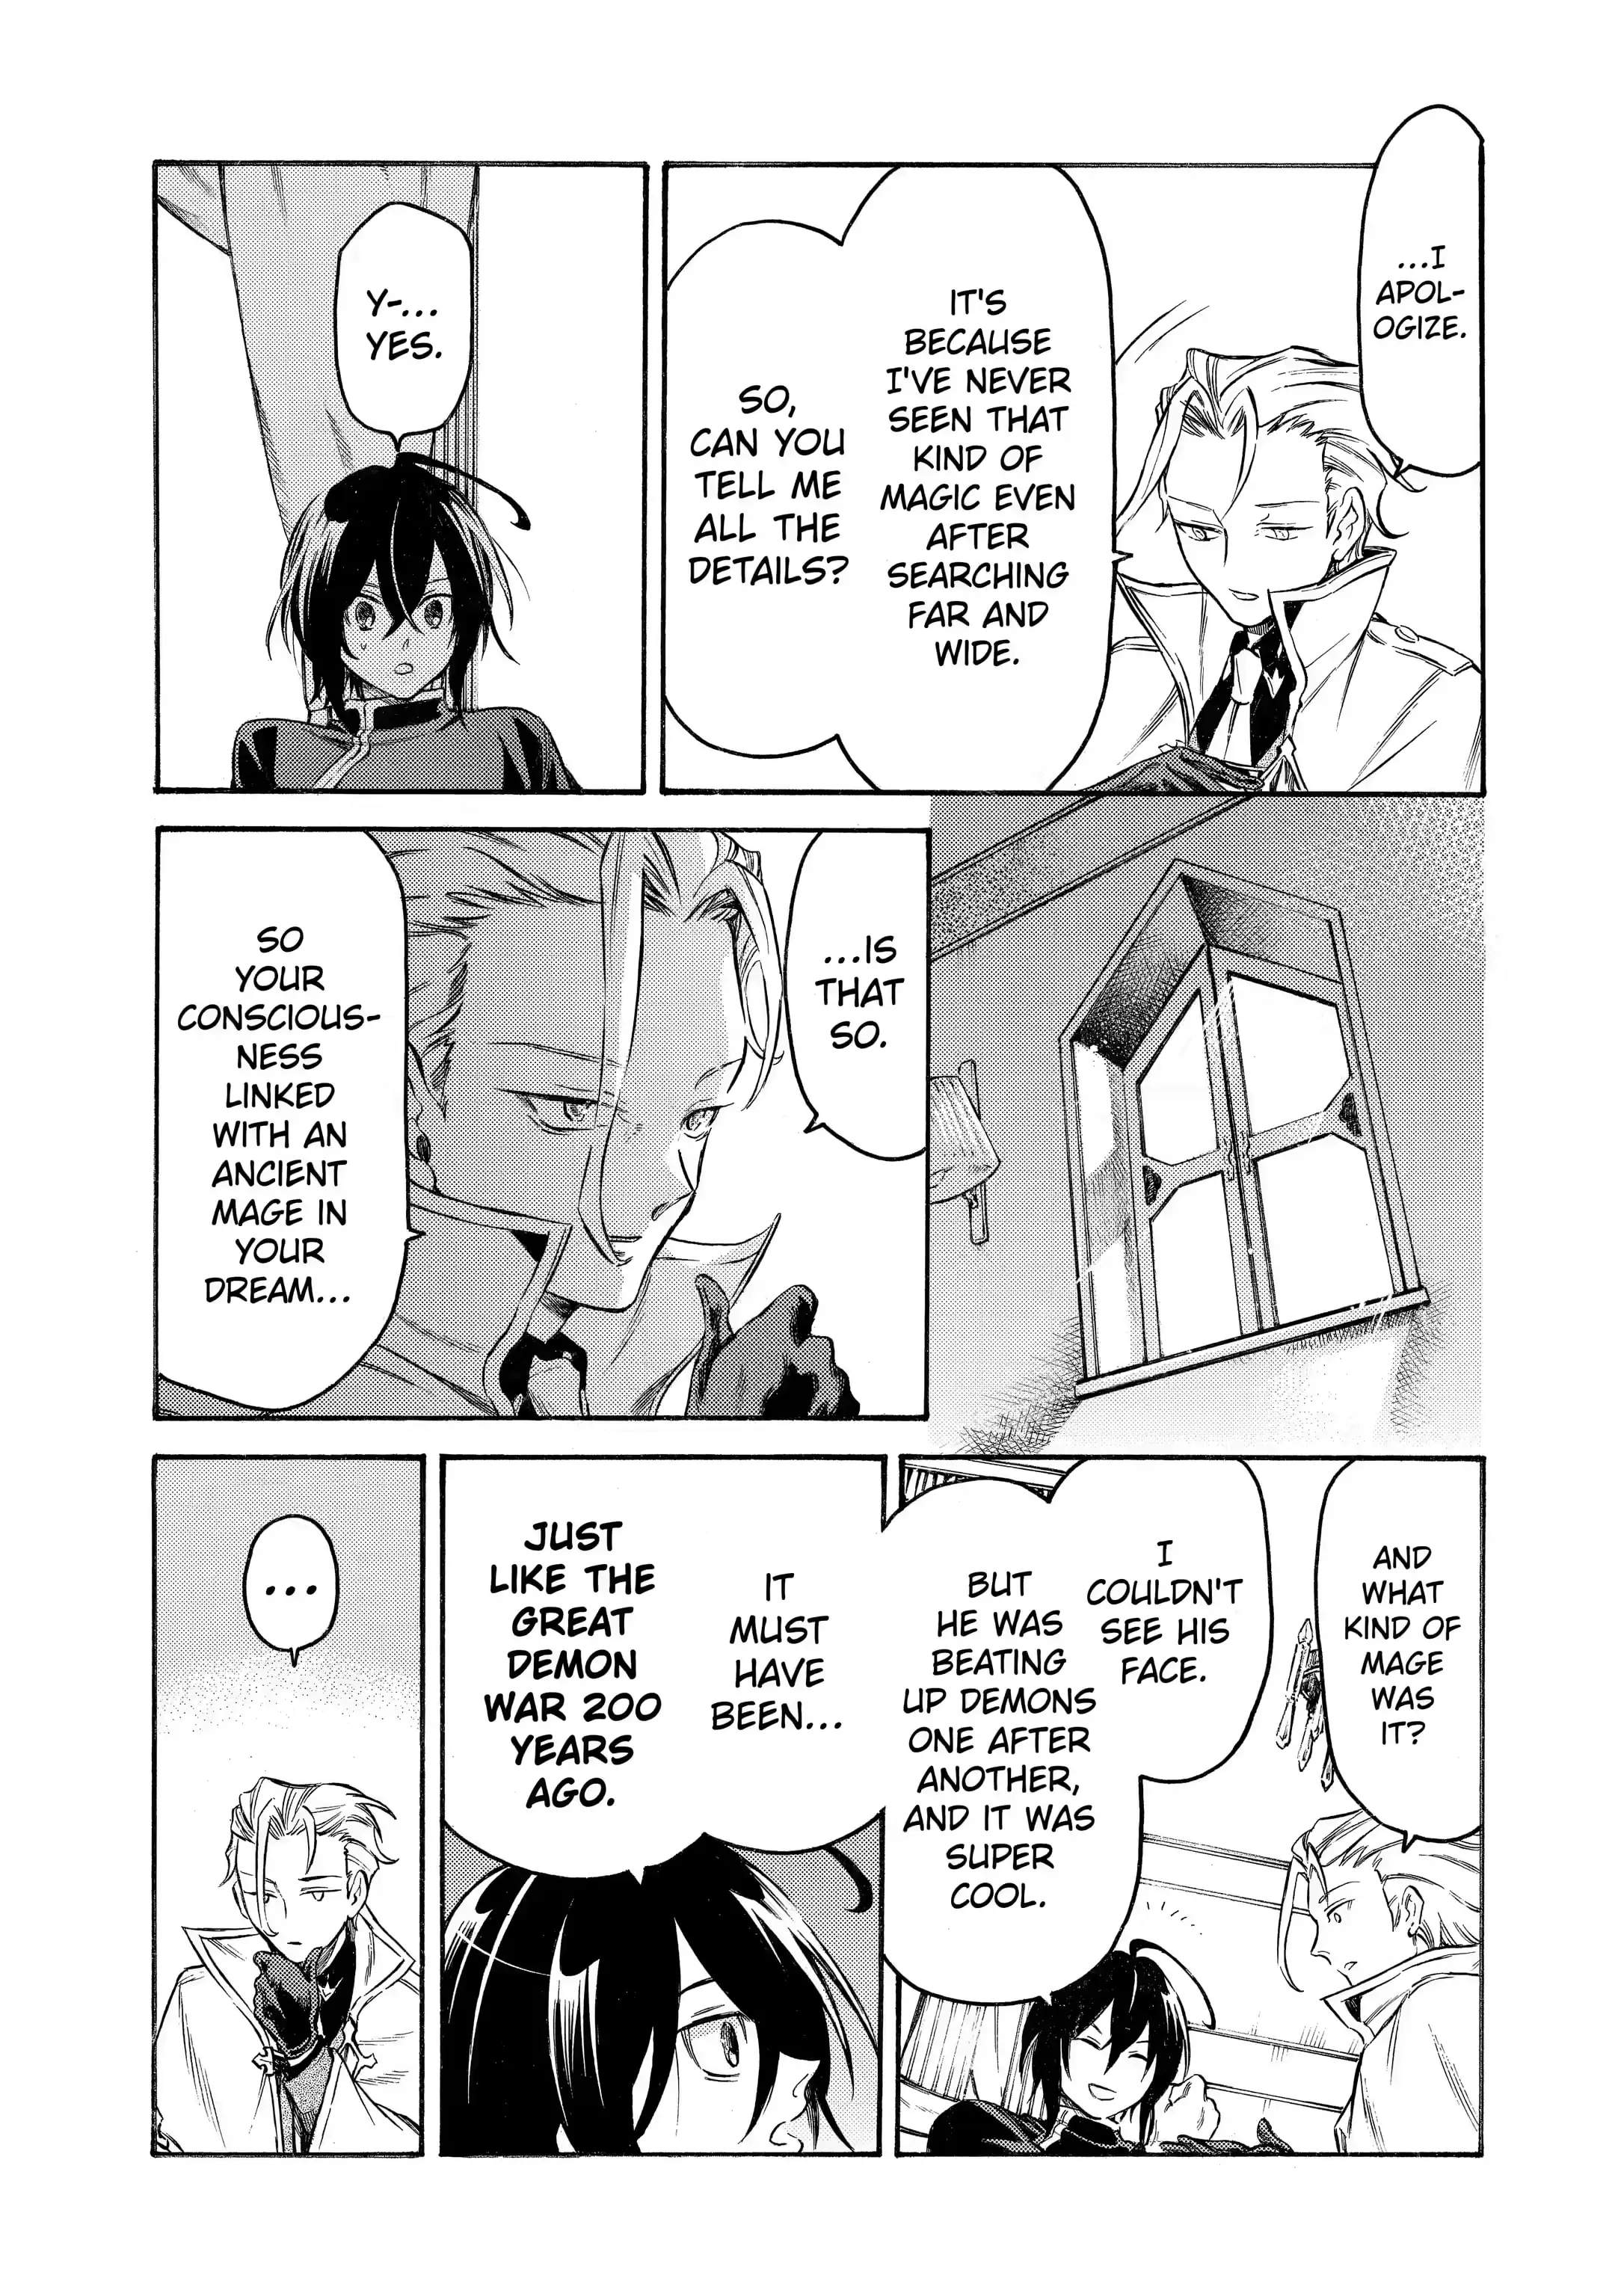 Reincarnation of the Unrivalled Time Mage: The Underachiever at the Magic Academy Turns Out to Be the Strongest Mage Who Controls Time! Chapter 2.1-eng-li - Page 7